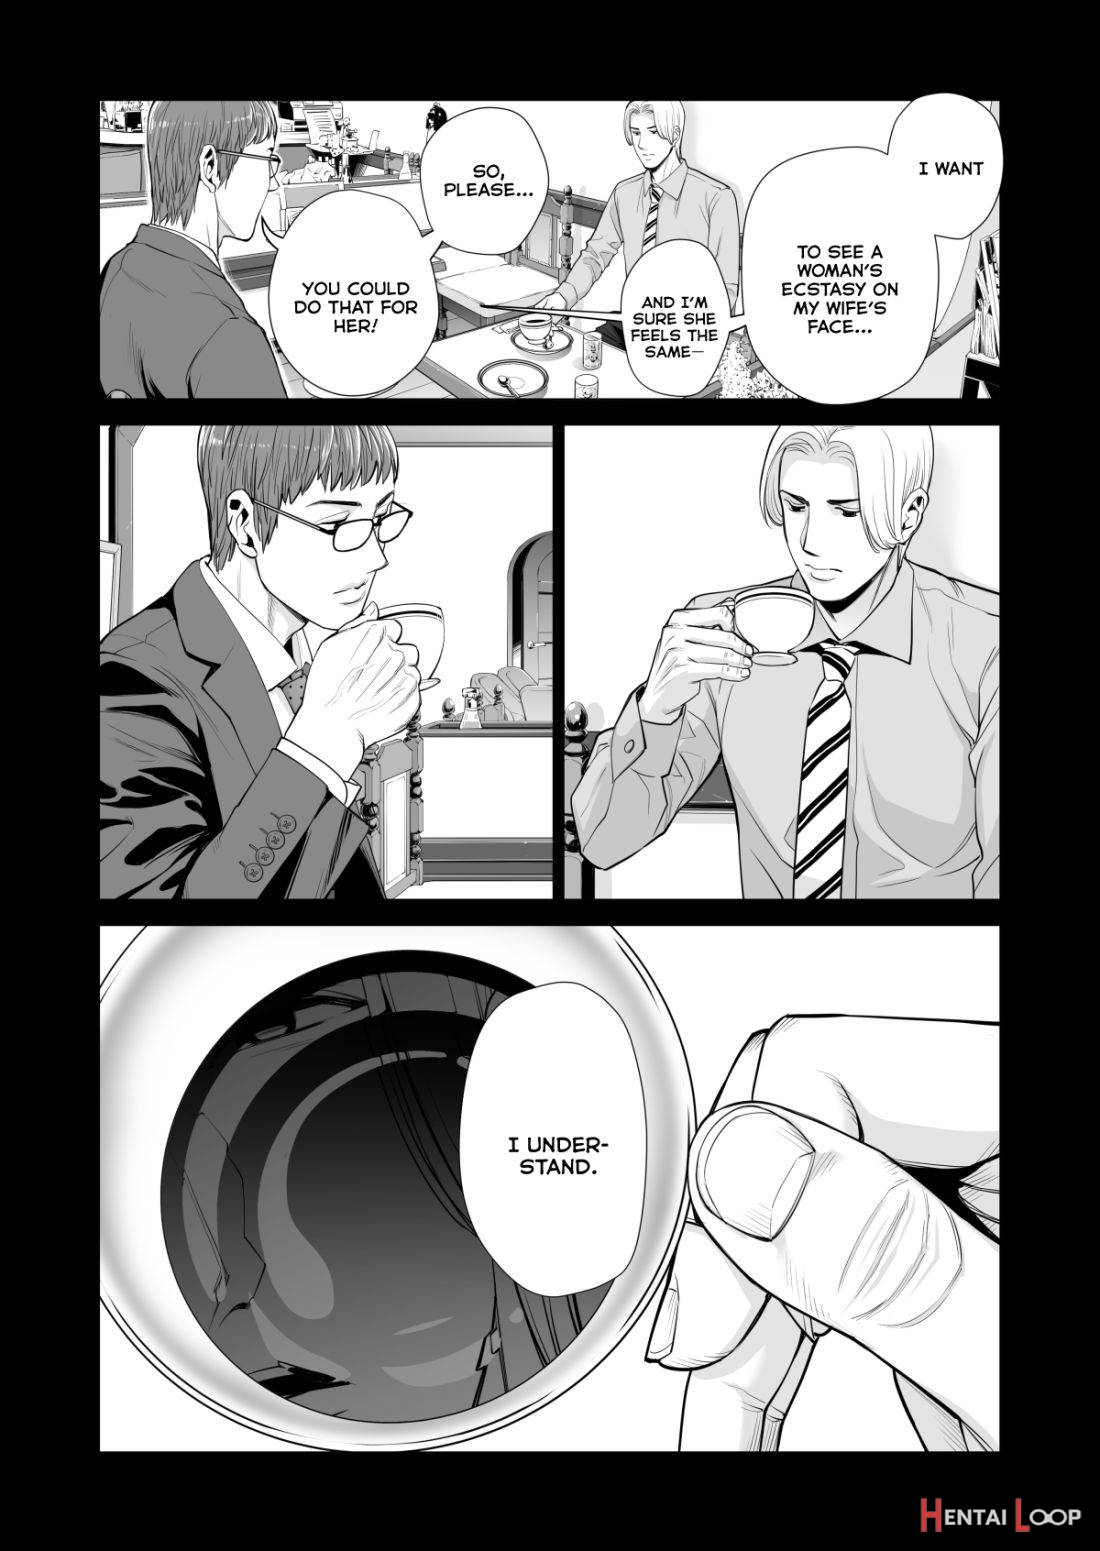 Tsukiyo no Midare Zake (Kouhen) Moonlit Intoxication ~ A Housewife Stolen by a Coworker Besides her Blackout Drunk Husband ~ Chapter 2 page 47